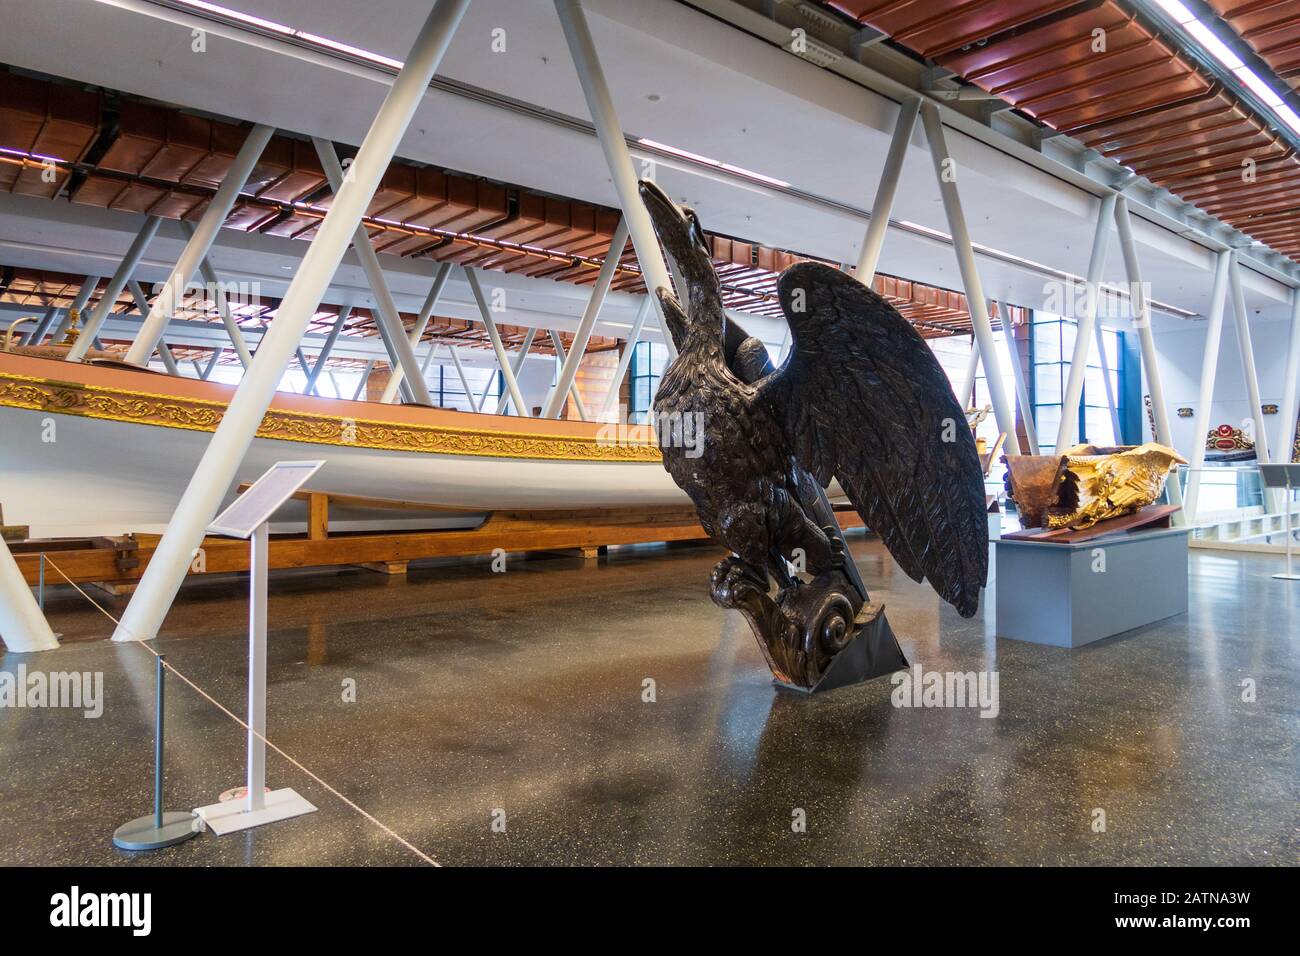 Istanbul, Turkey - Jan 12, 2020: imperial caiques, mostly from the 19th century, and ship figureheads  are displayed in The Istanbul Naval Museum, Tur Stock Photo